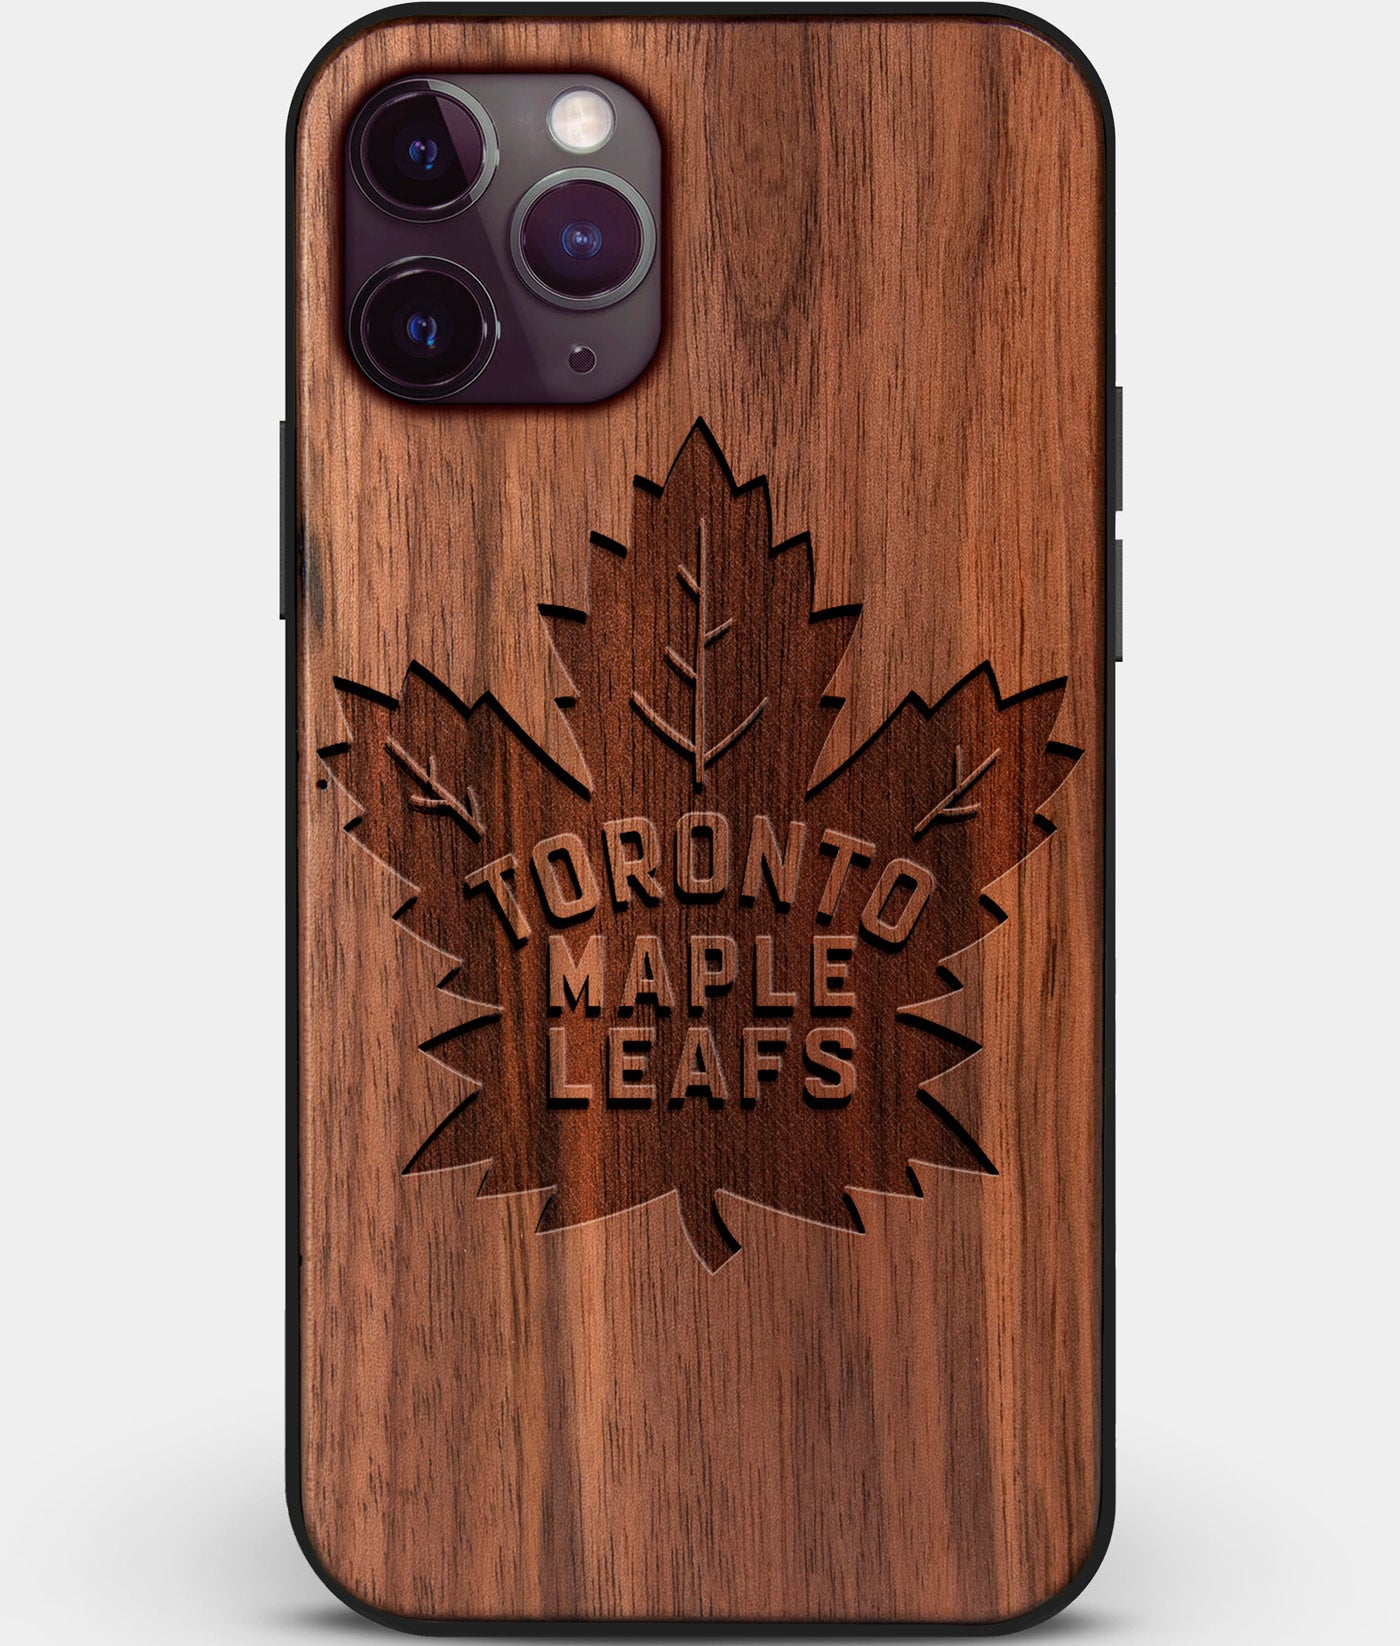 Custom Carved Wood Toronto Maple Leafs iPhone 11 Pro Max Case | Personalized Walnut Wood Toronto Maple Leafs Cover, Birthday Gift, Gifts For Him, Monogrammed Gift For Fan | by Engraved In Nature